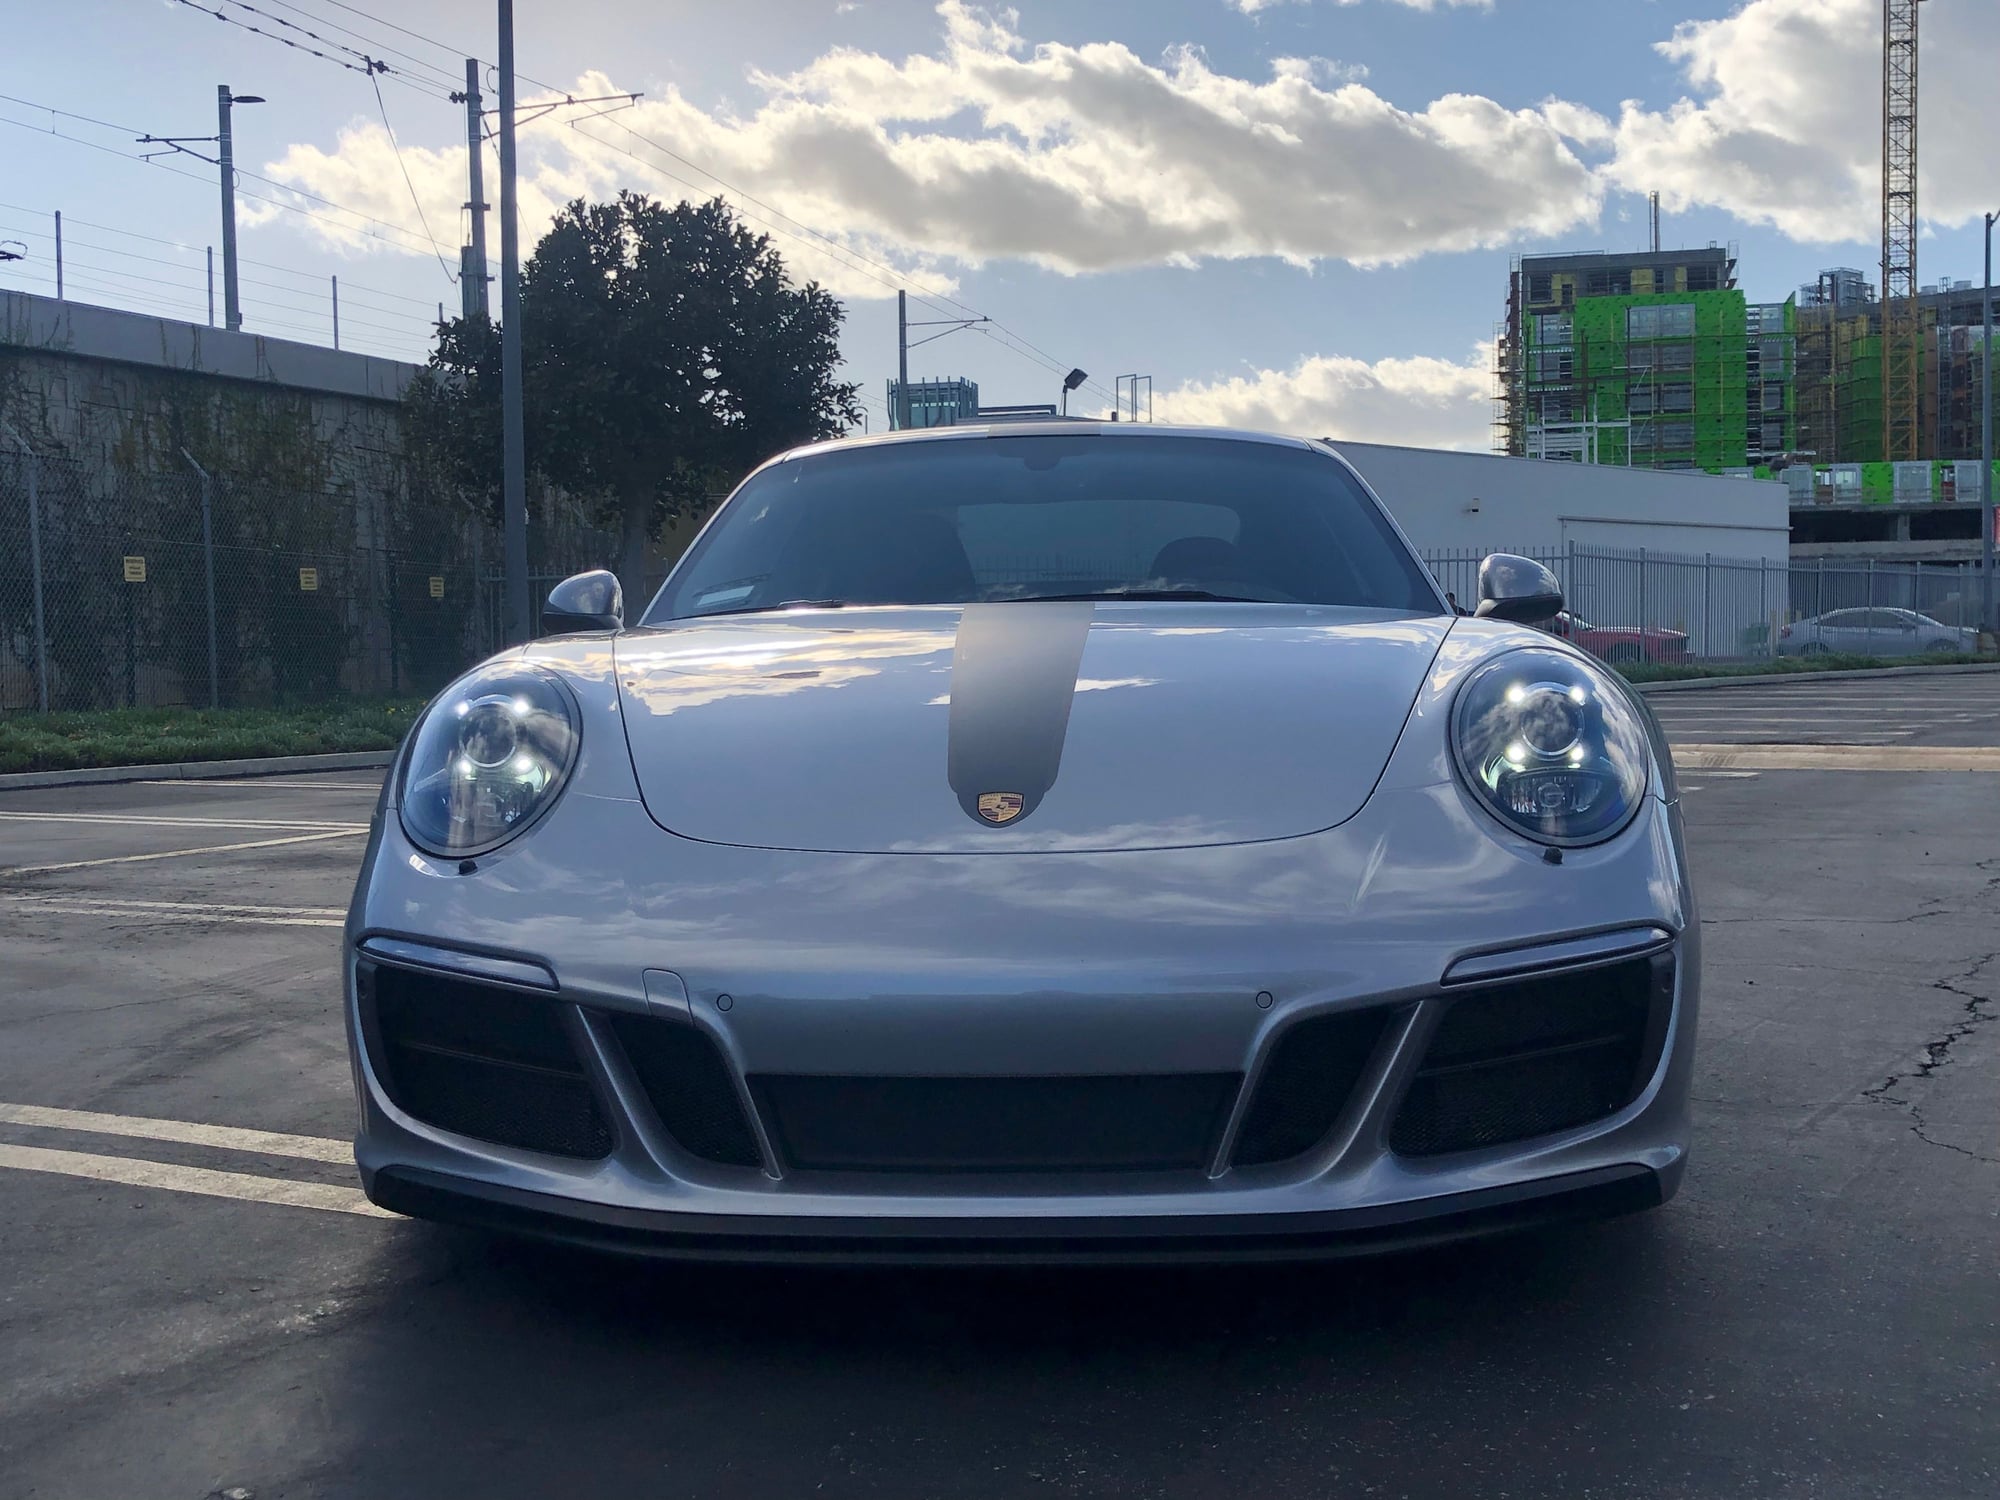 2018 Porsche 911 - 2018 GTS 991.2 GT SILVER PDK - Used - VIN WP0AB2A99JS122630 - 9,675 Miles - 6 cyl - 2WD - Automatic - Coupe - Silver - Los Angeles, CA 90064, United States